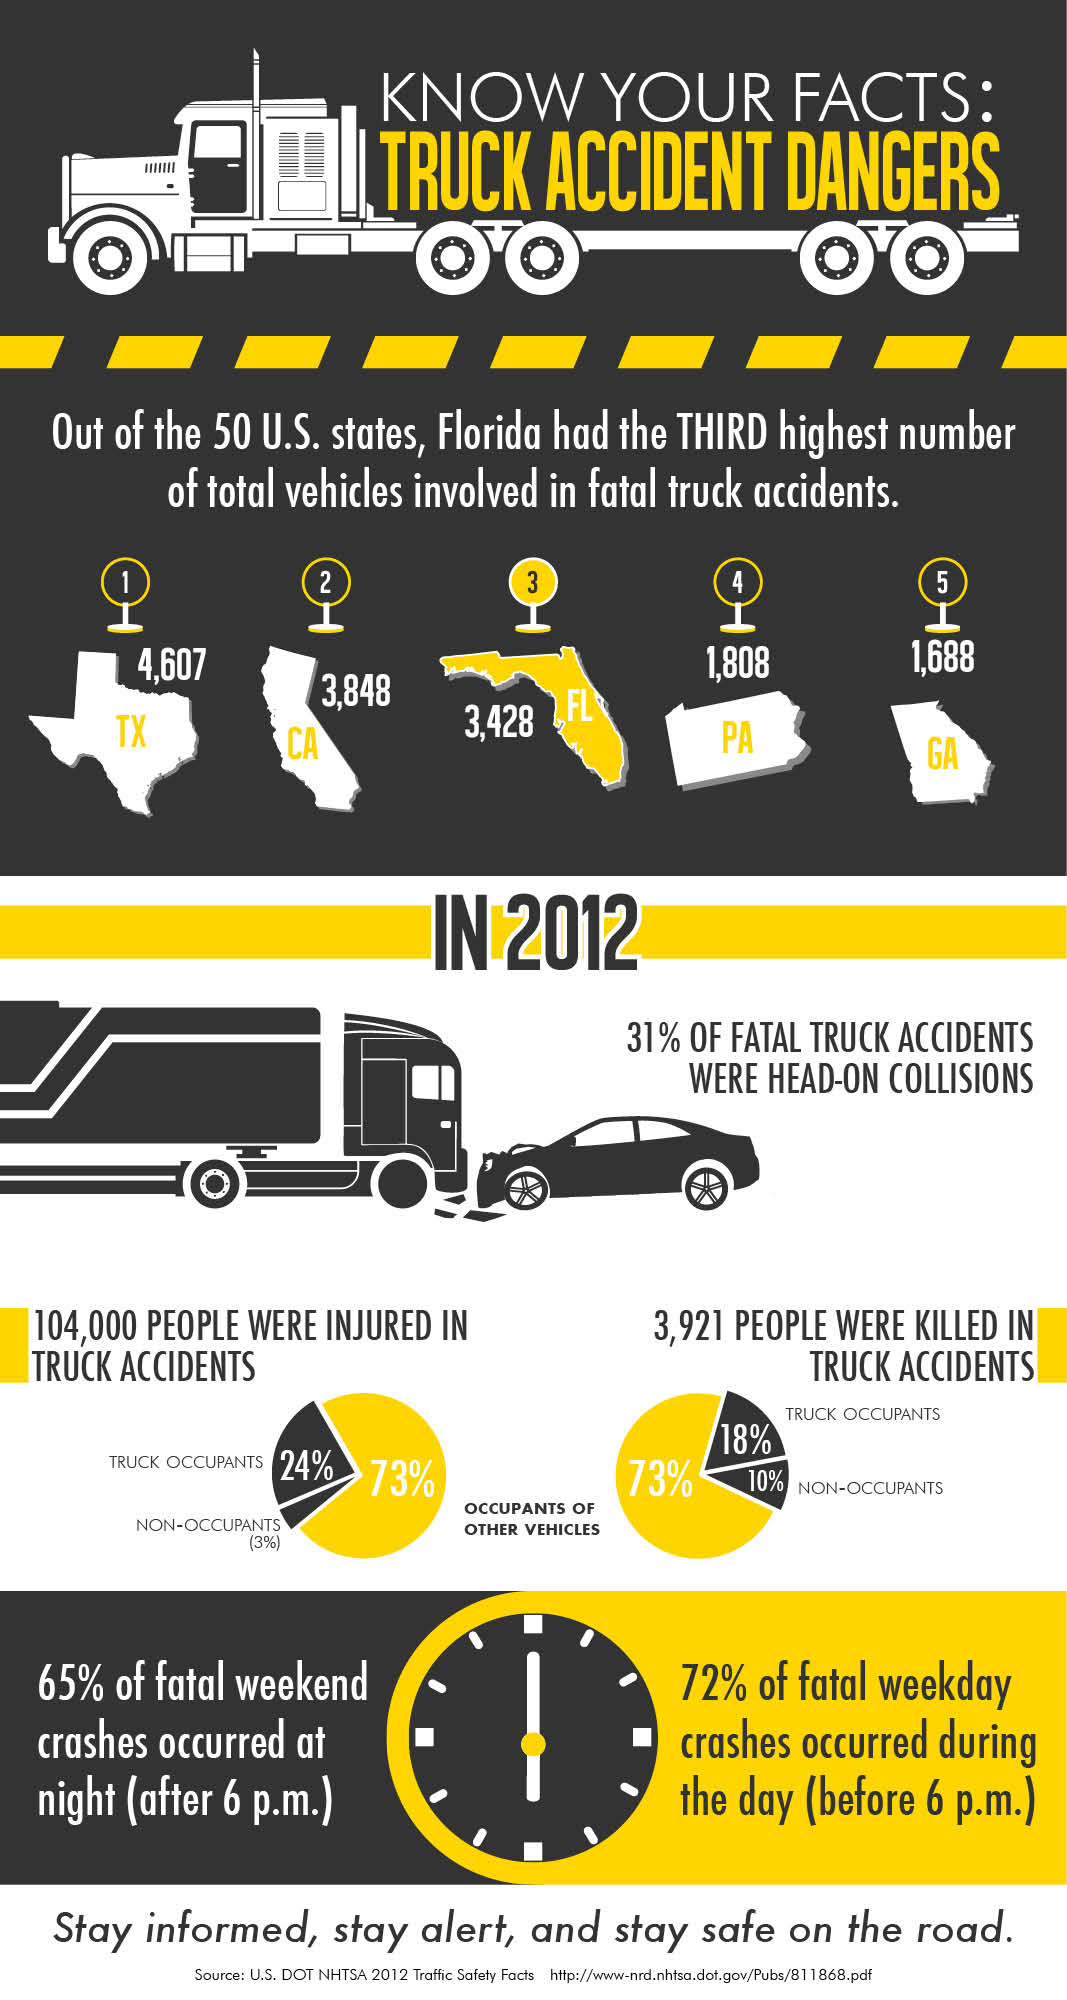 Truck Accident Dangers Infographic